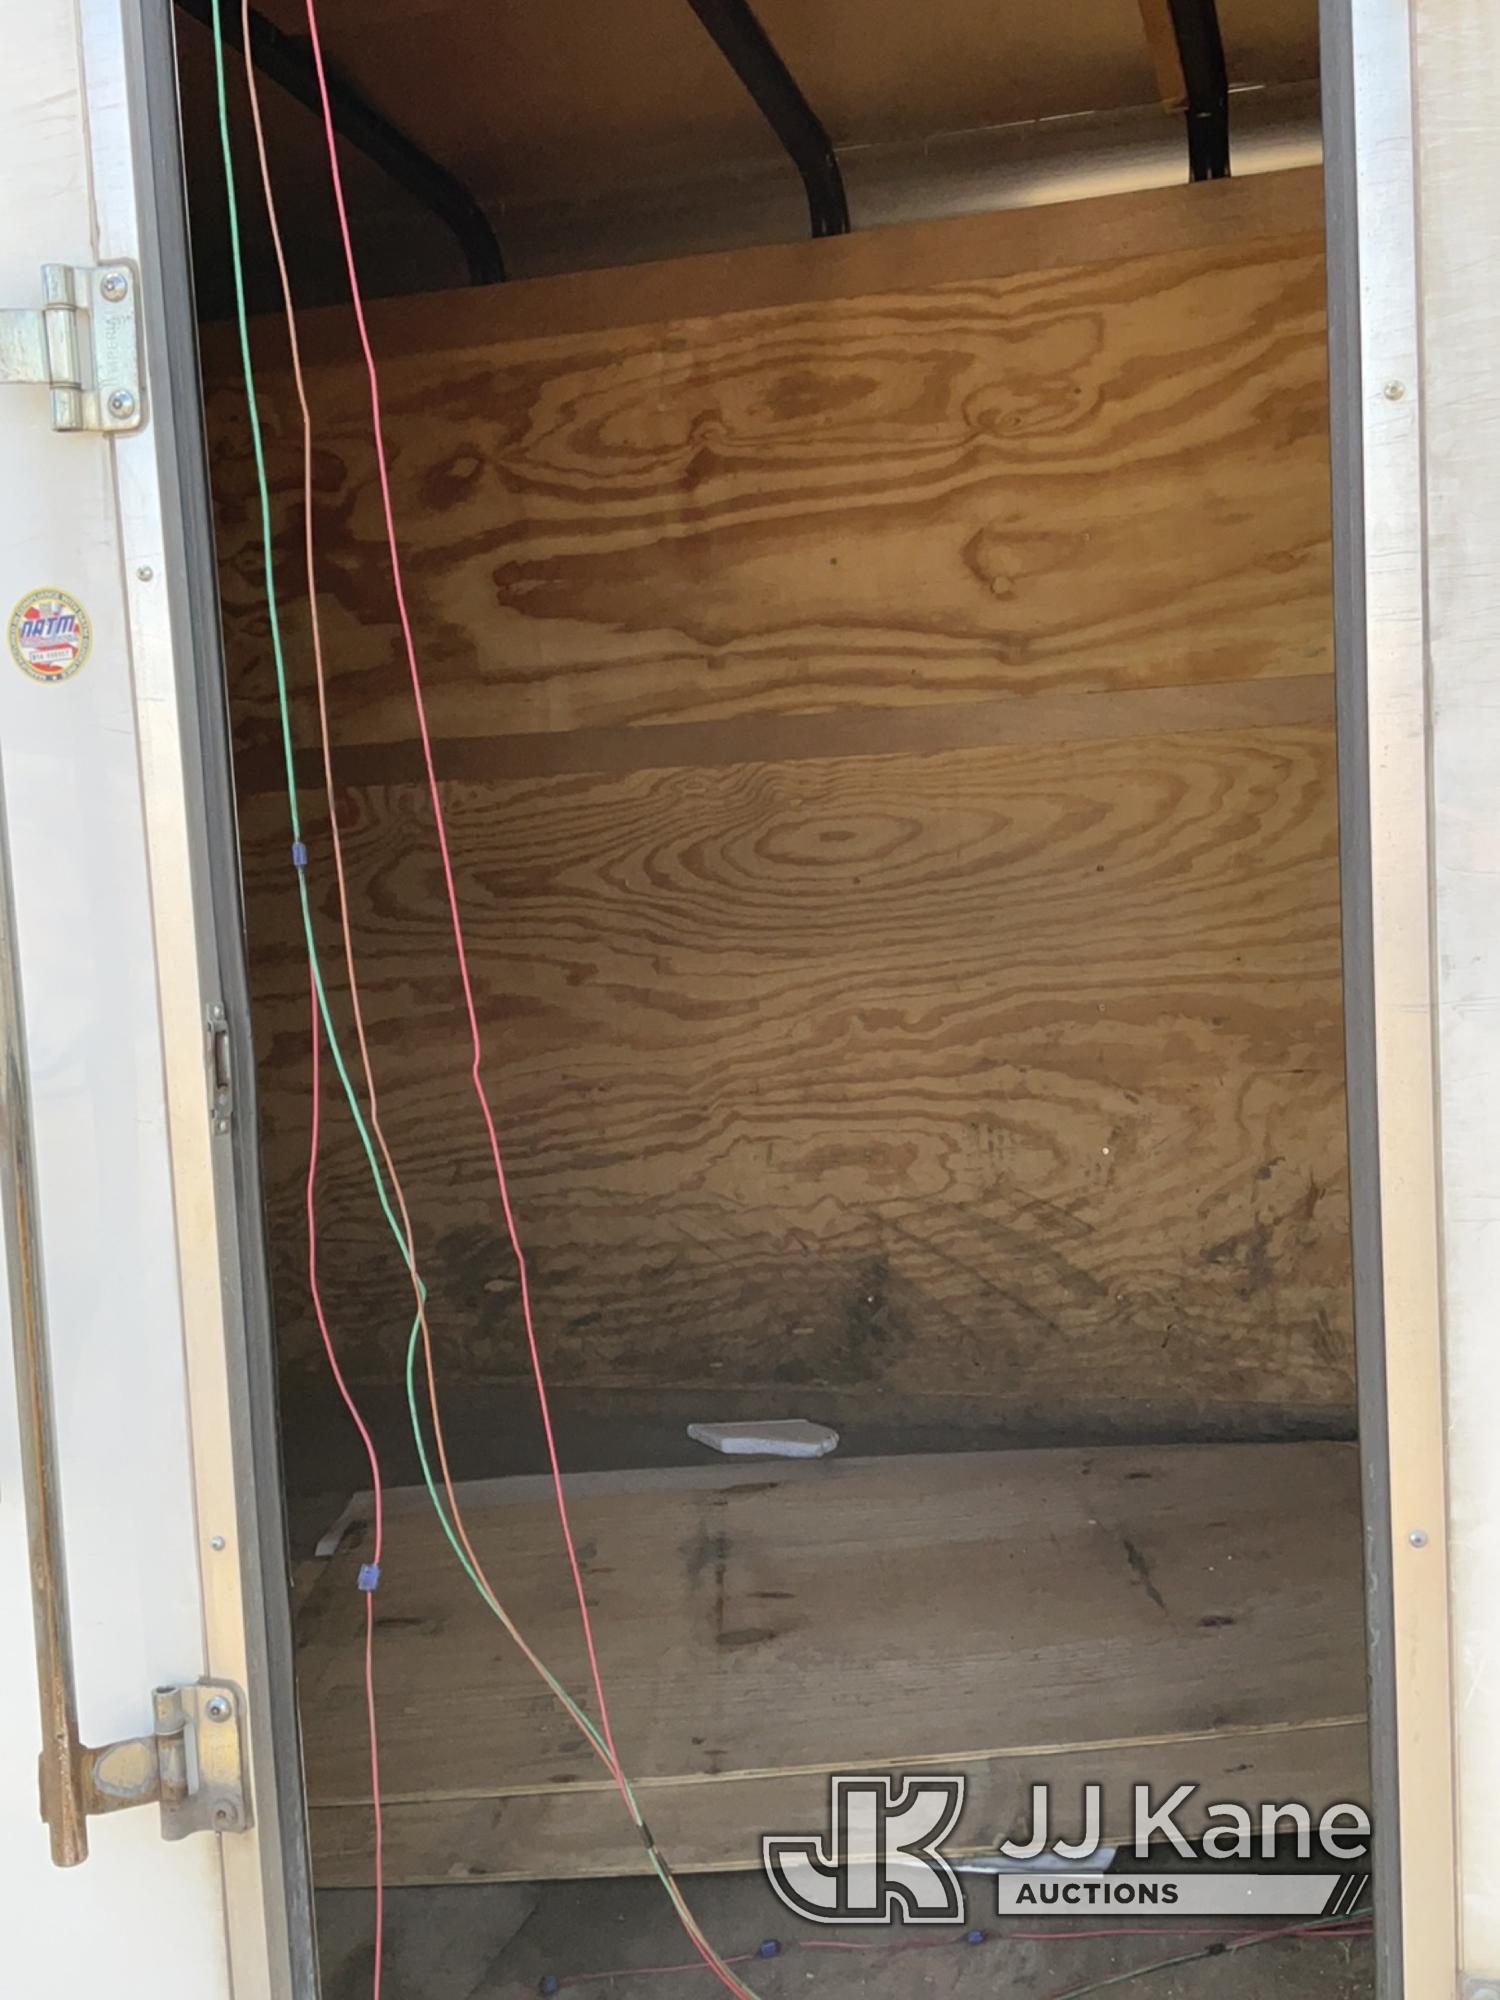 (South Beloit, IL) 2015 Forest River T/A Enclosed Trailer No Title) (Seller States: Body & Frame Bad